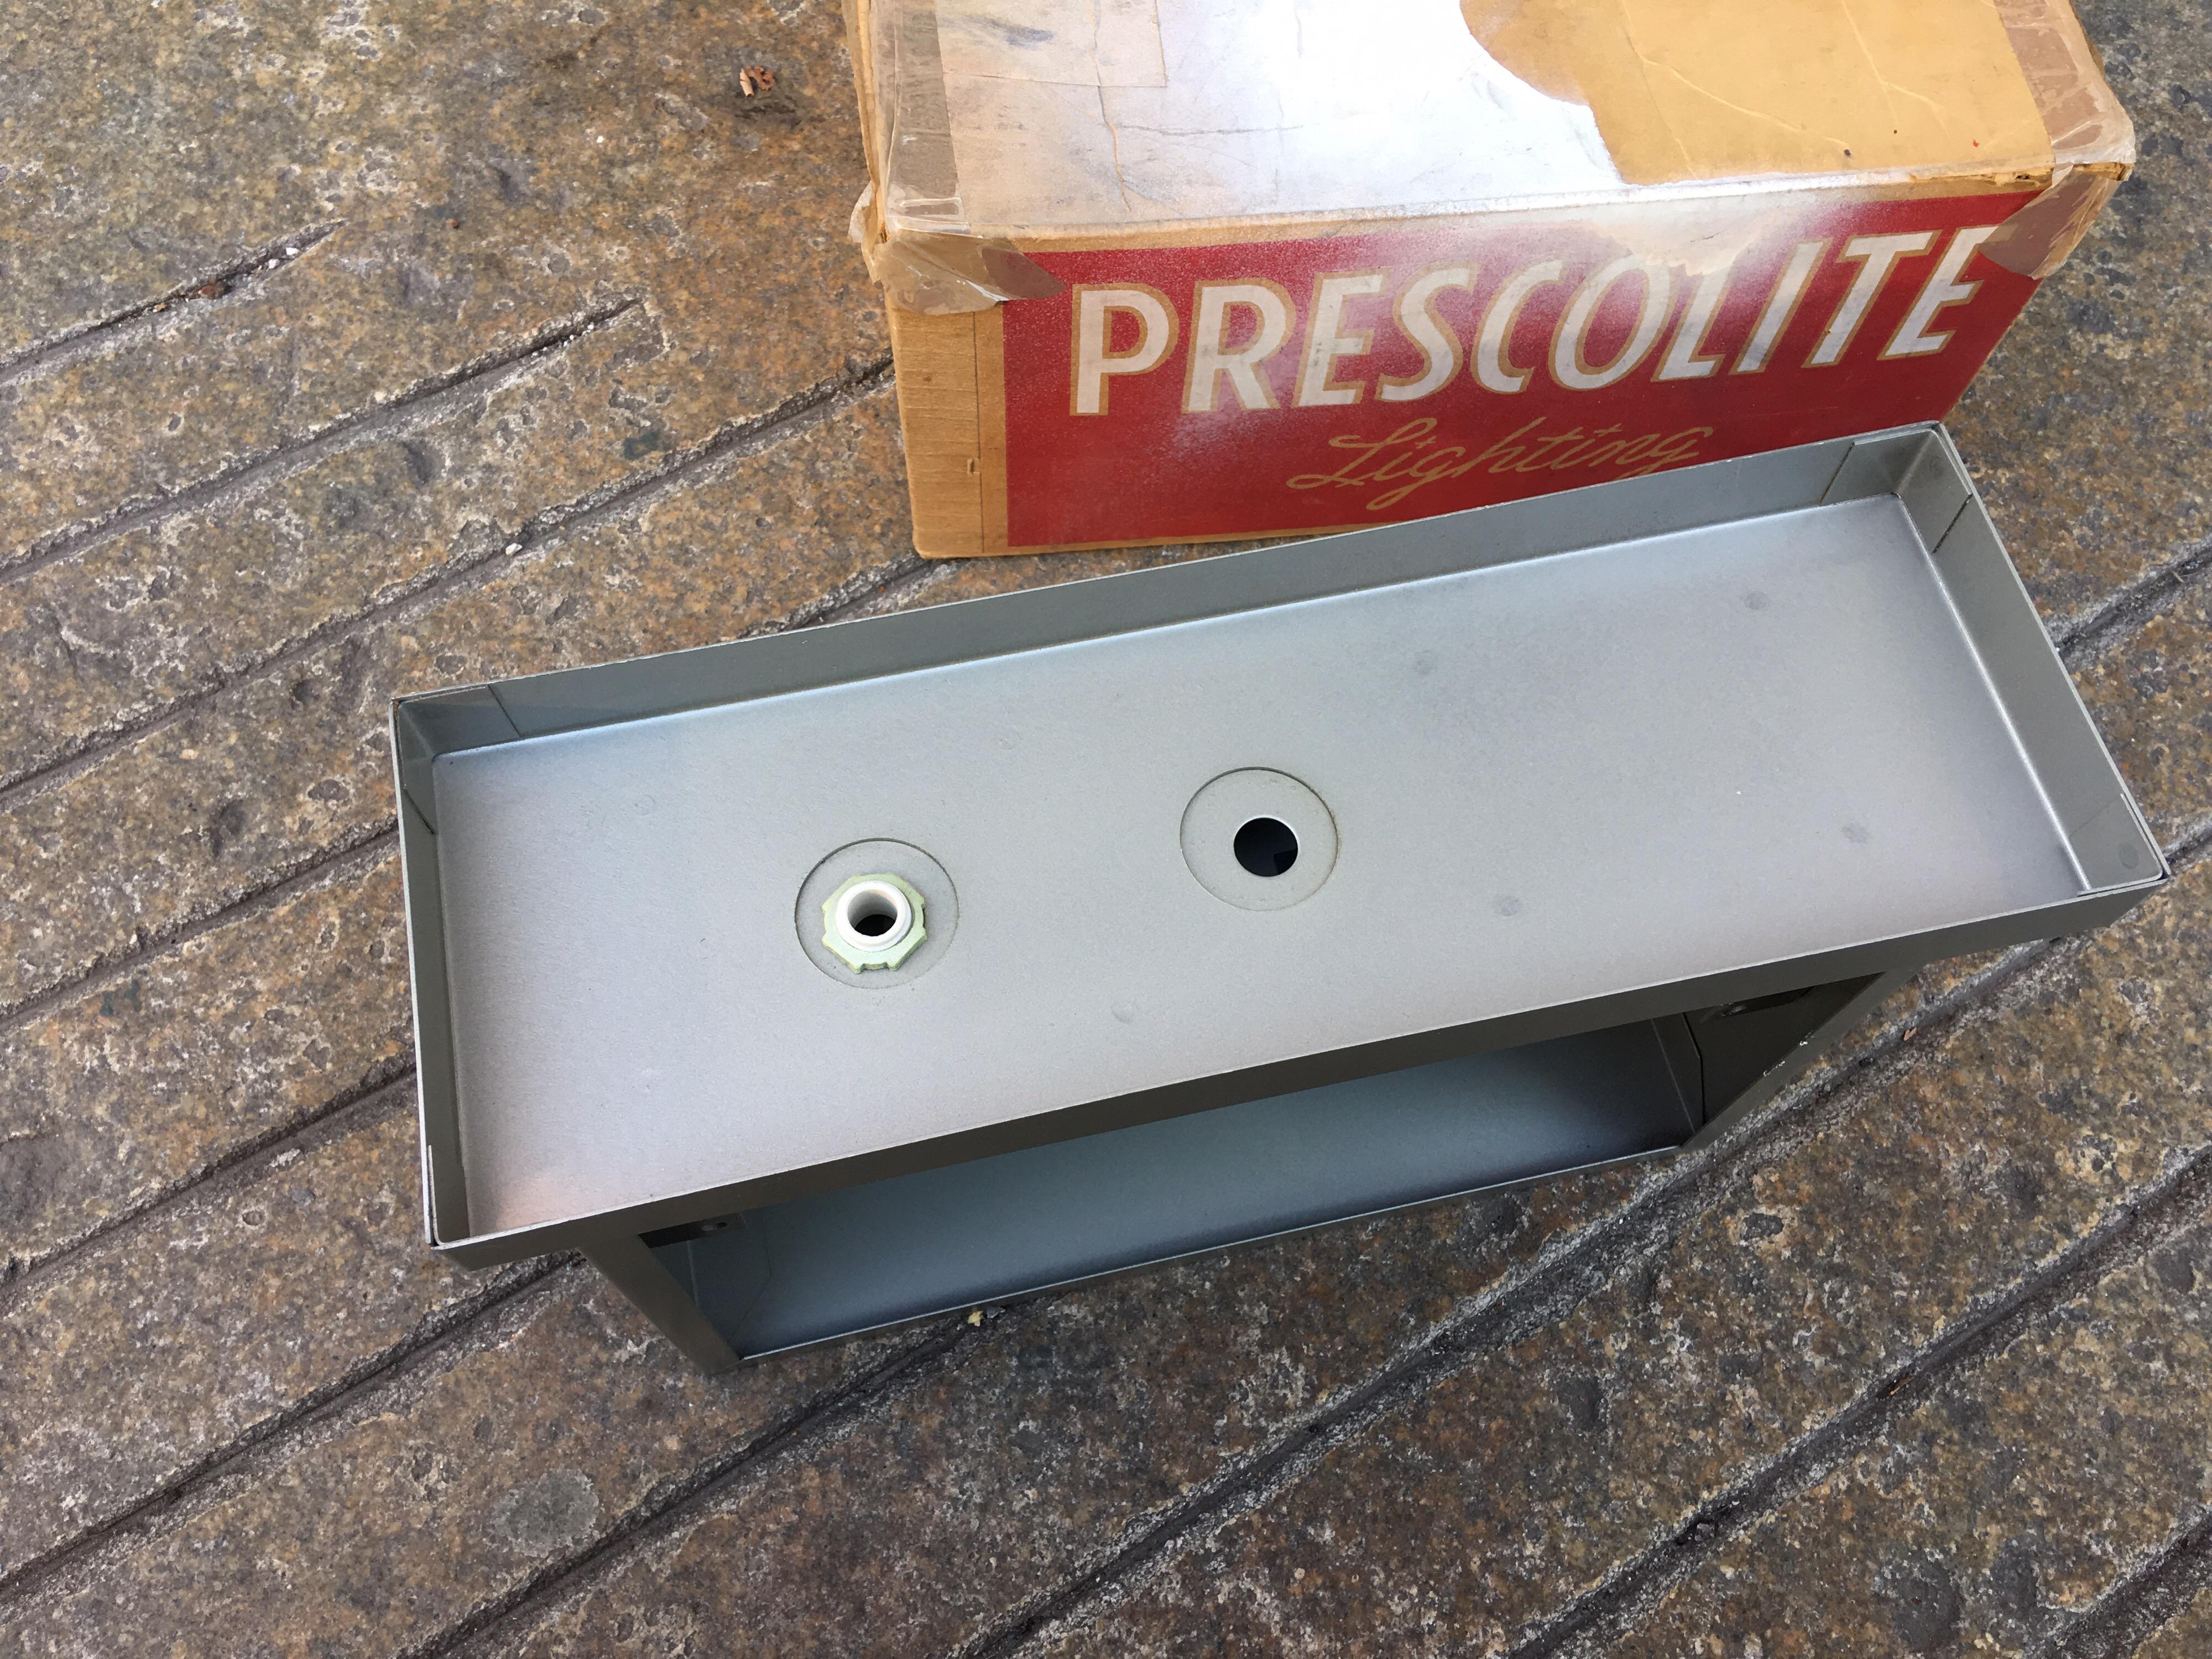 American Prescolite exit sign  New Old Stock with box!